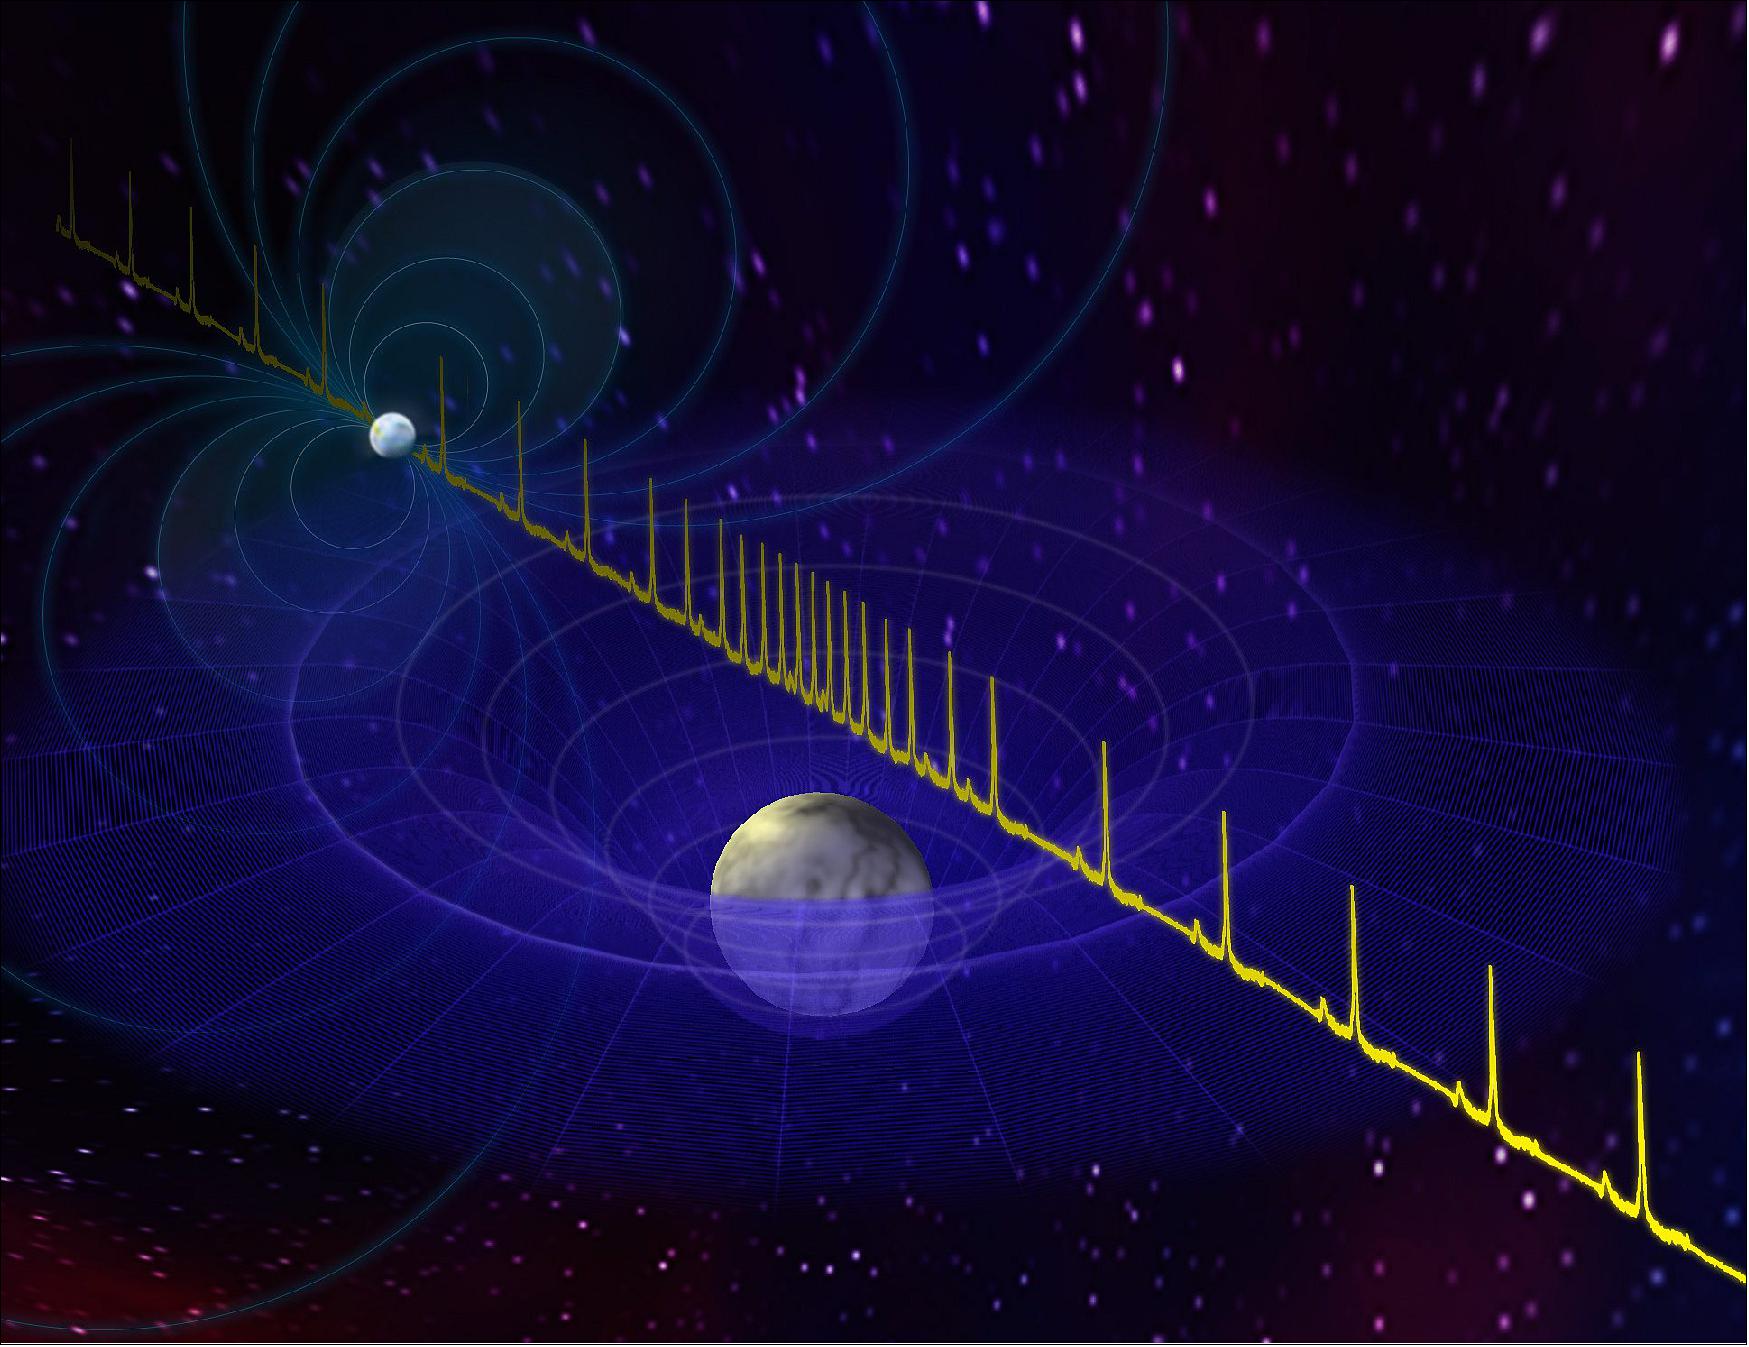 Figure 52: Artist impression of the pulse from a massive neutron star being delayed by the passage of a white dwarf star between the neutron star and Earth (image credit: B. Saxton, NRAO/AUI/NSF)